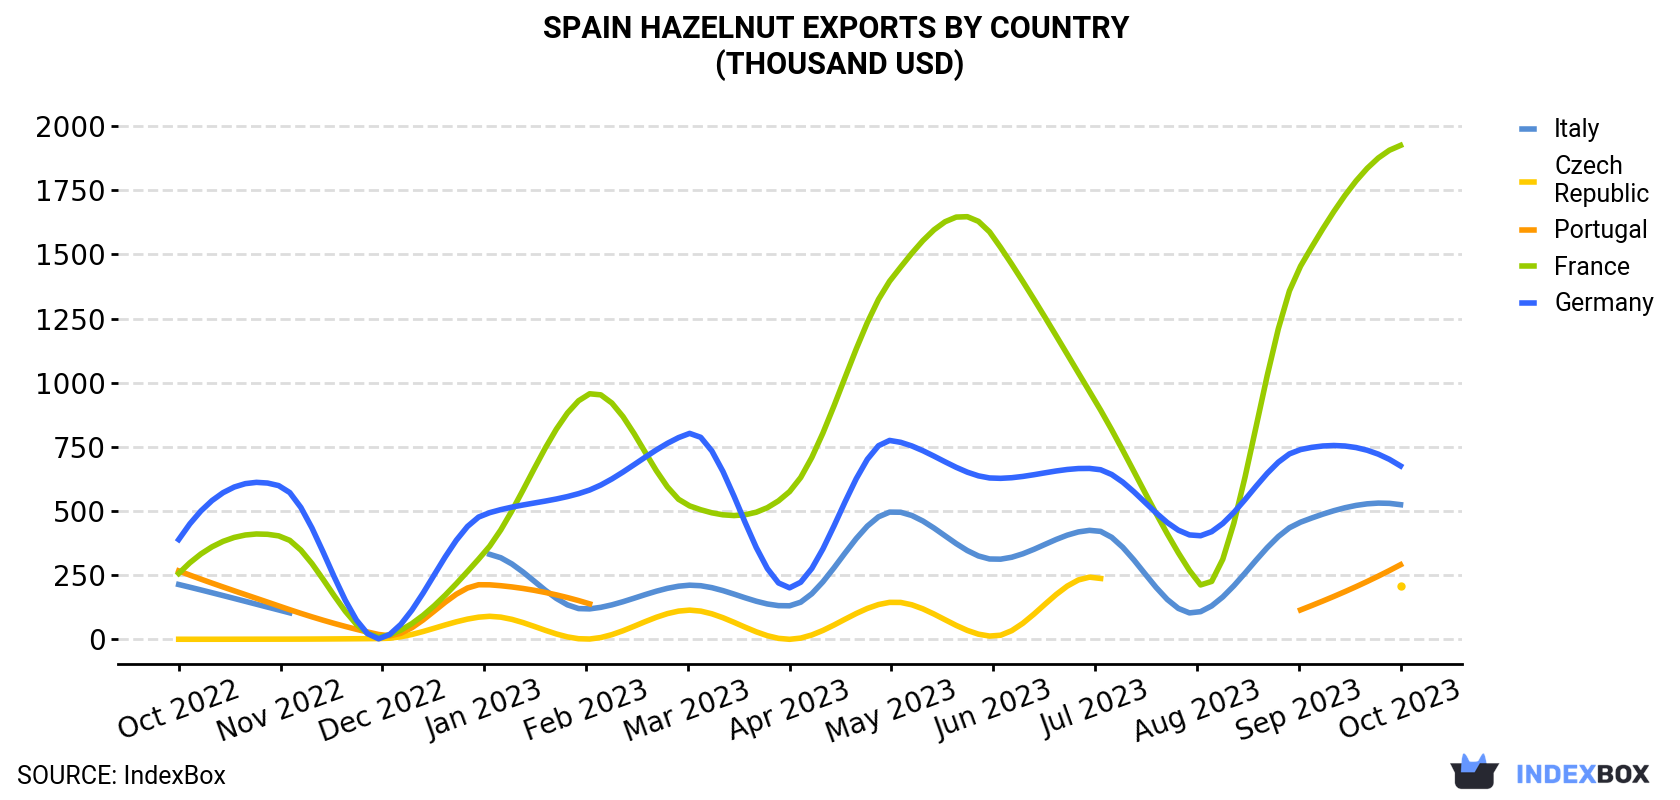 Spain Hazelnut Exports By Country (Thousand USD)